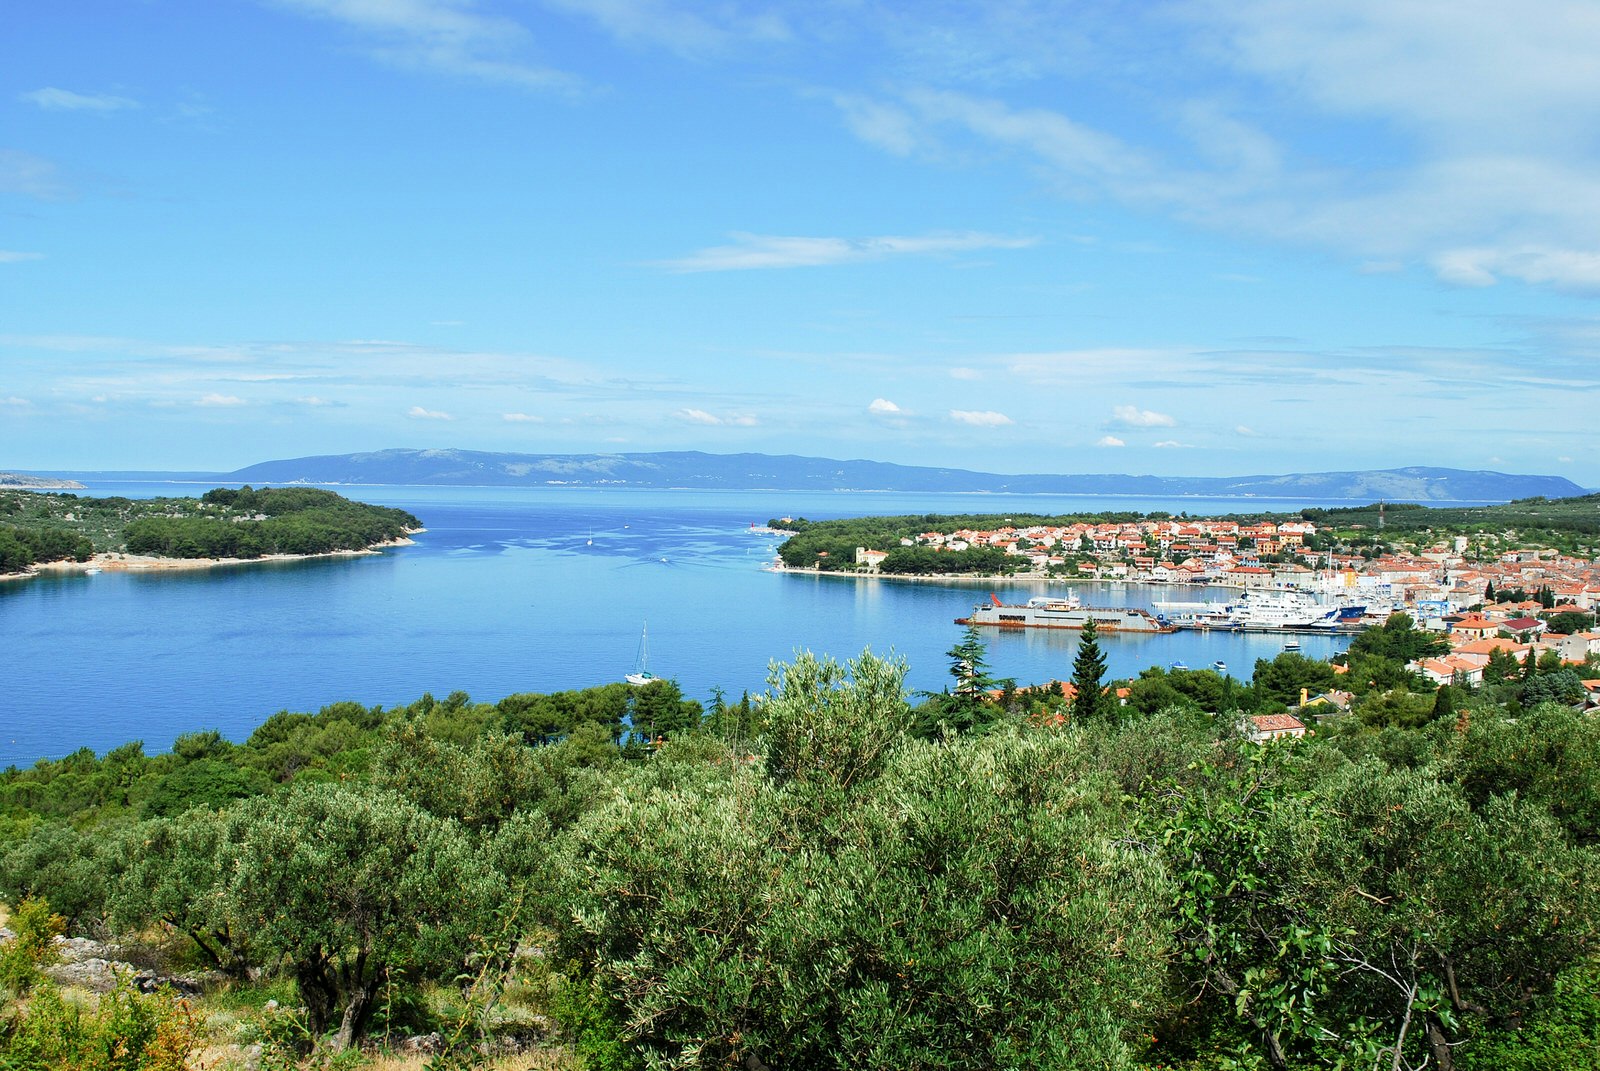 A panoramic shot of the small port on the island of Lošinj, Croatia on a sunny day